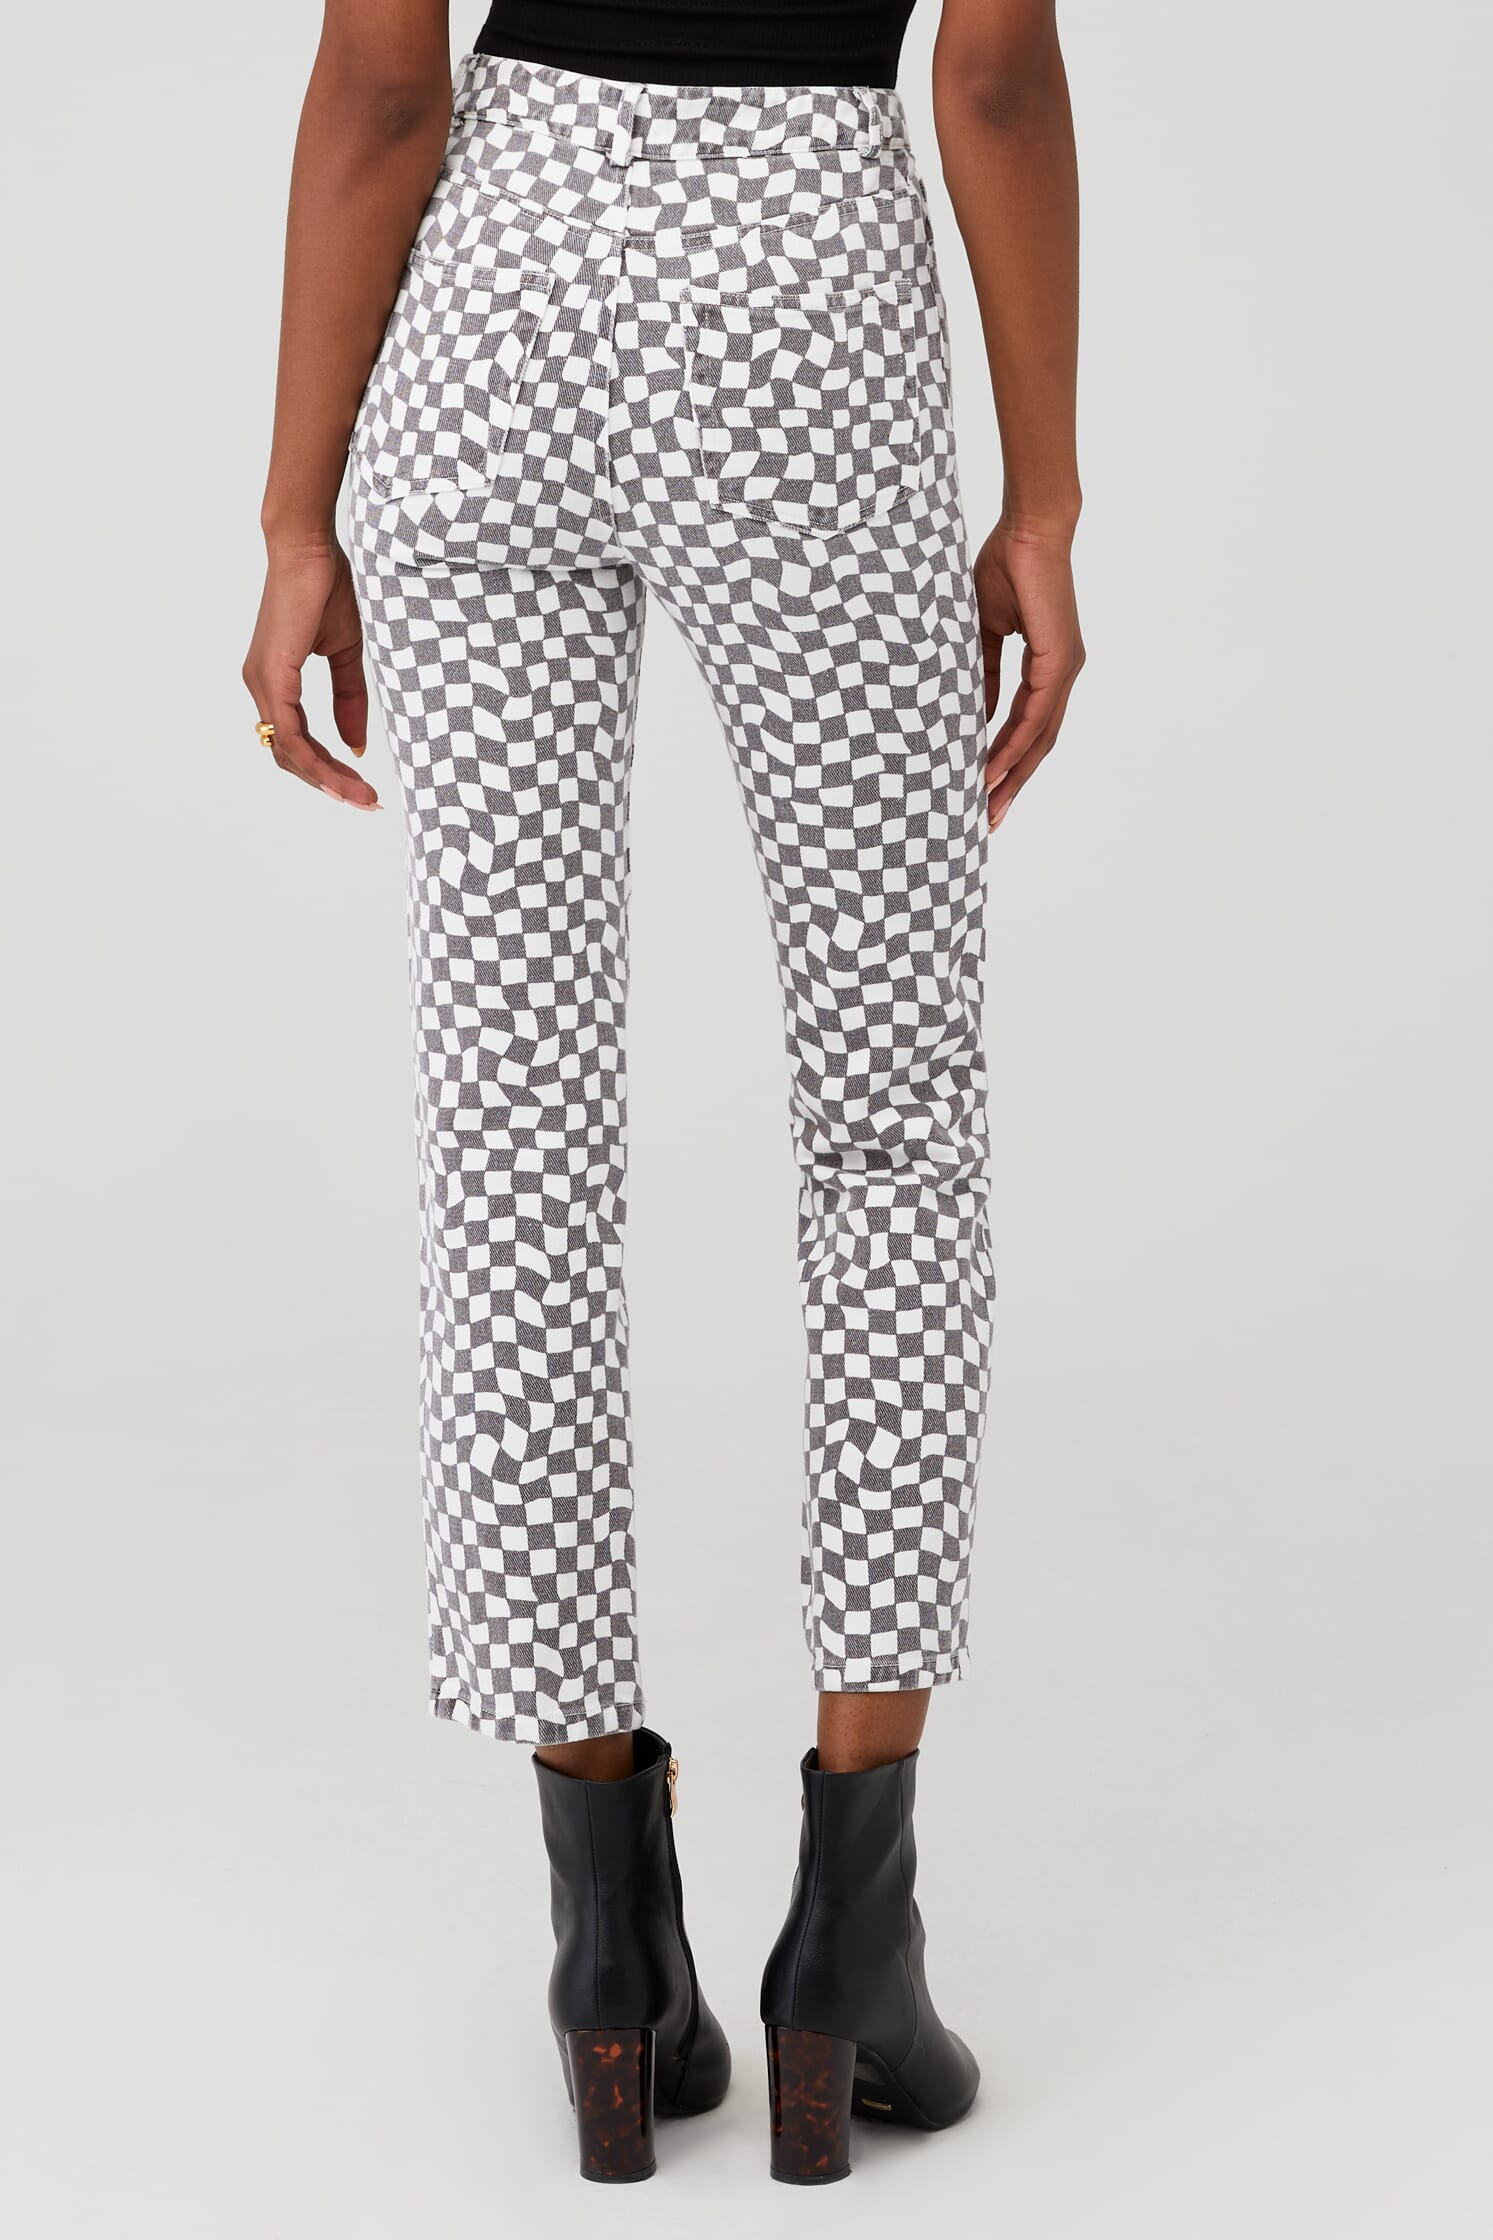 https://images.fashionpass.com/products/electric-avenue-pants-peppermayo-warped-check-494-3.jpeg?profile=a